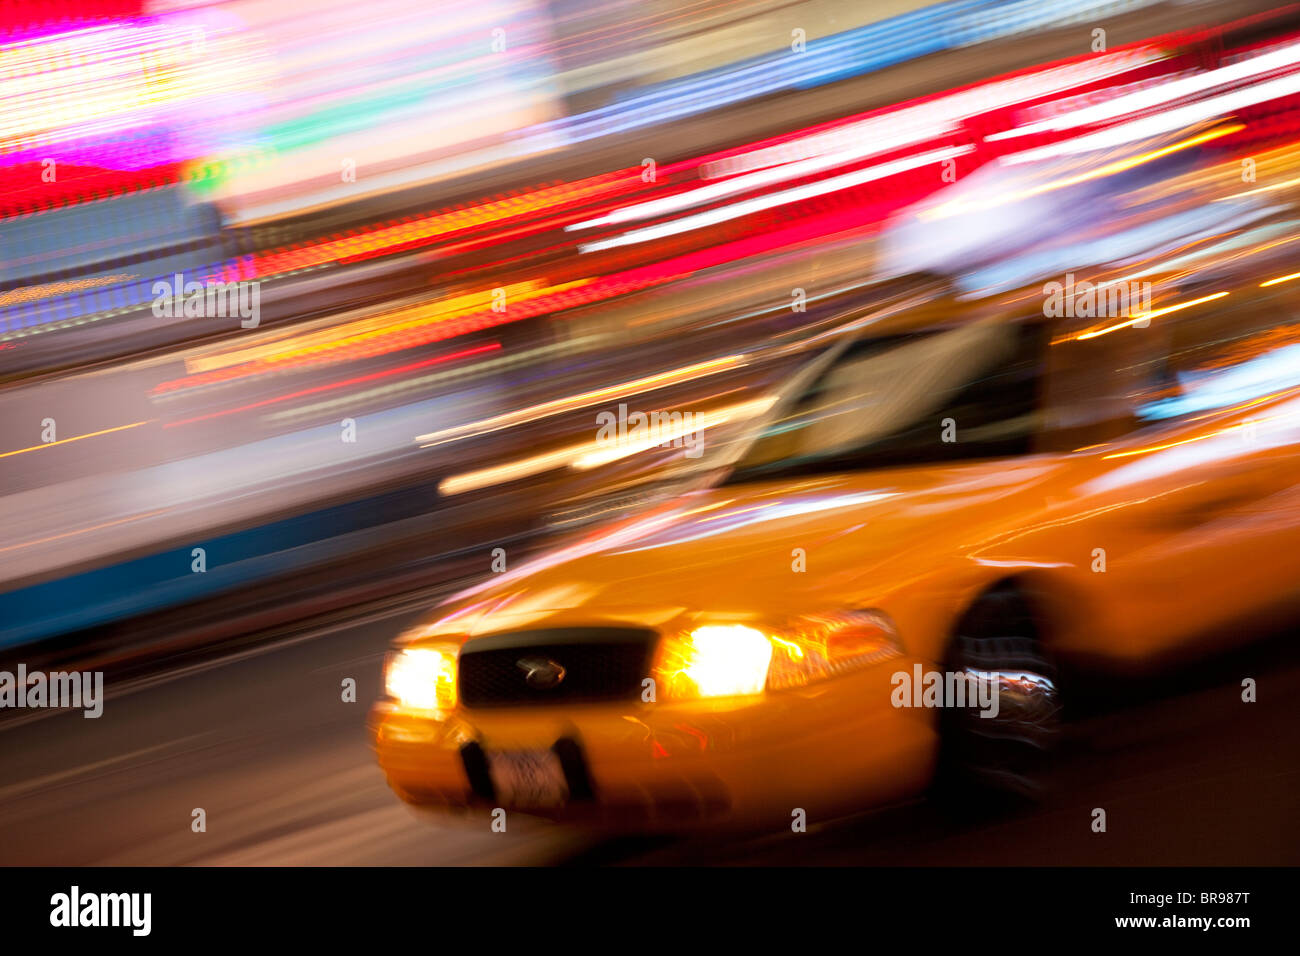 Taxi Cab at night in Times Square, Manhattan, New York City USA Stock Photo